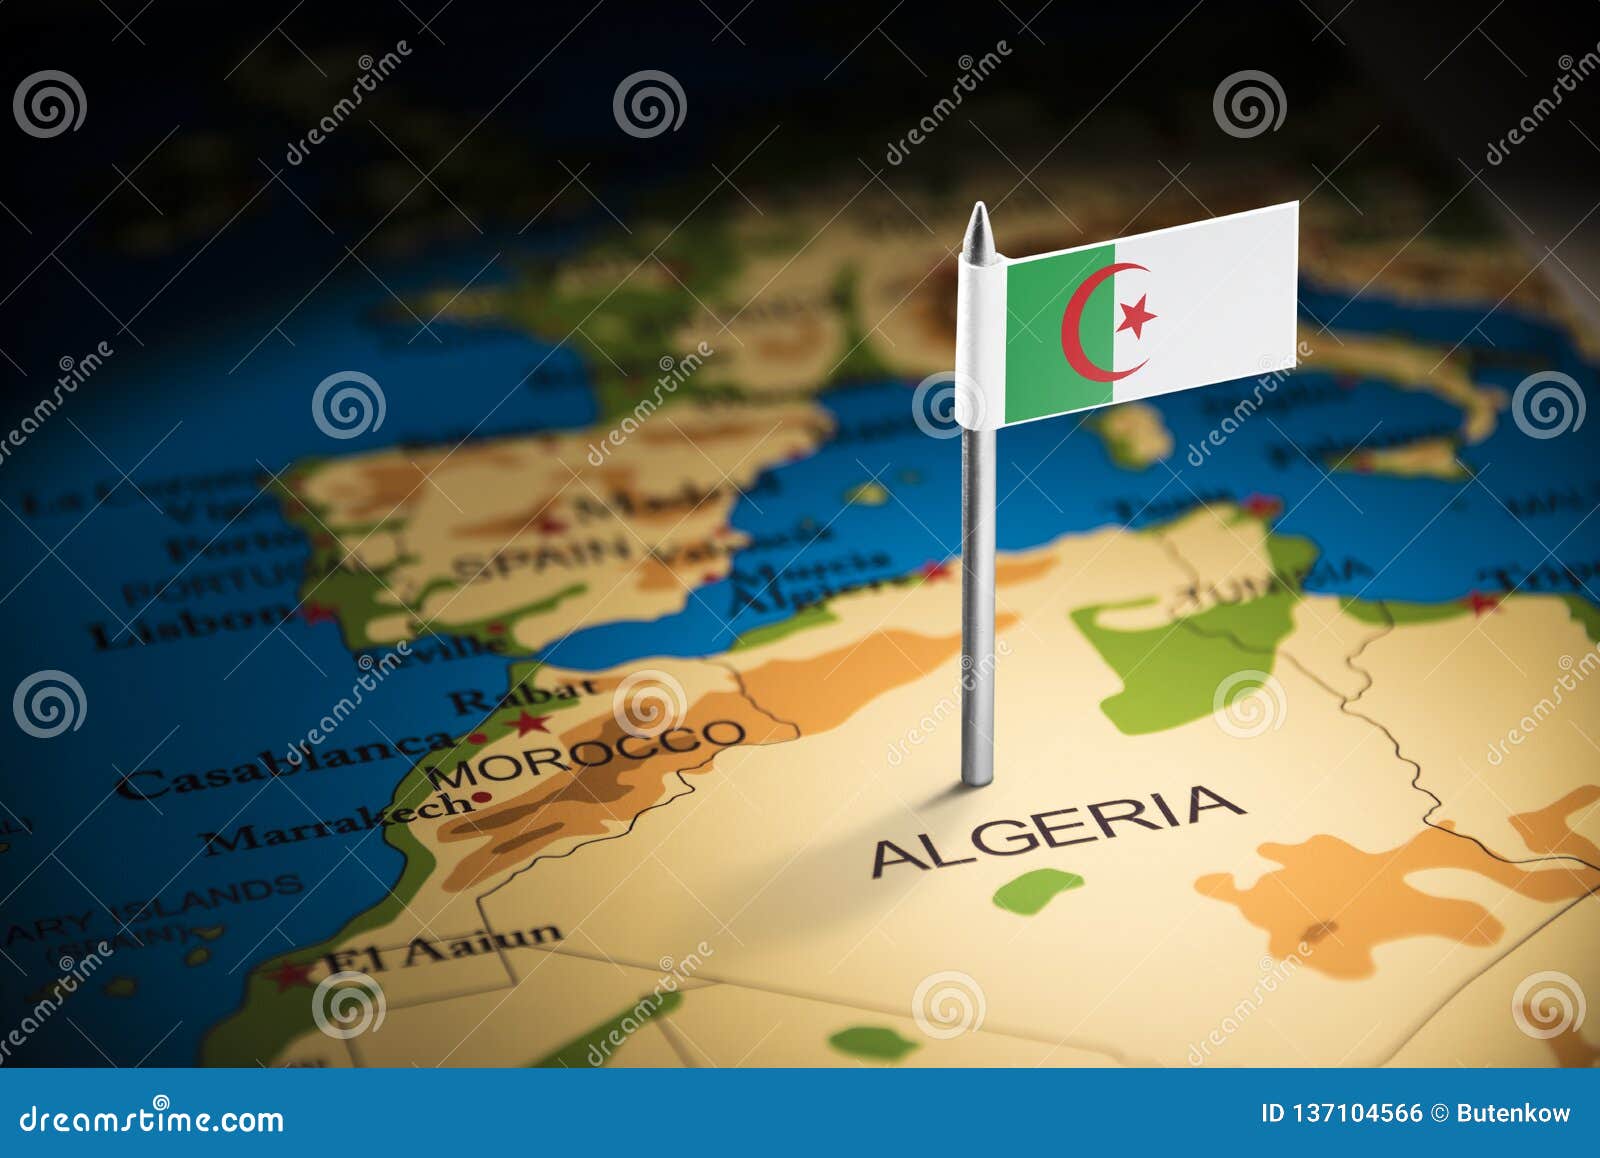 algeria marked with a flag on the map